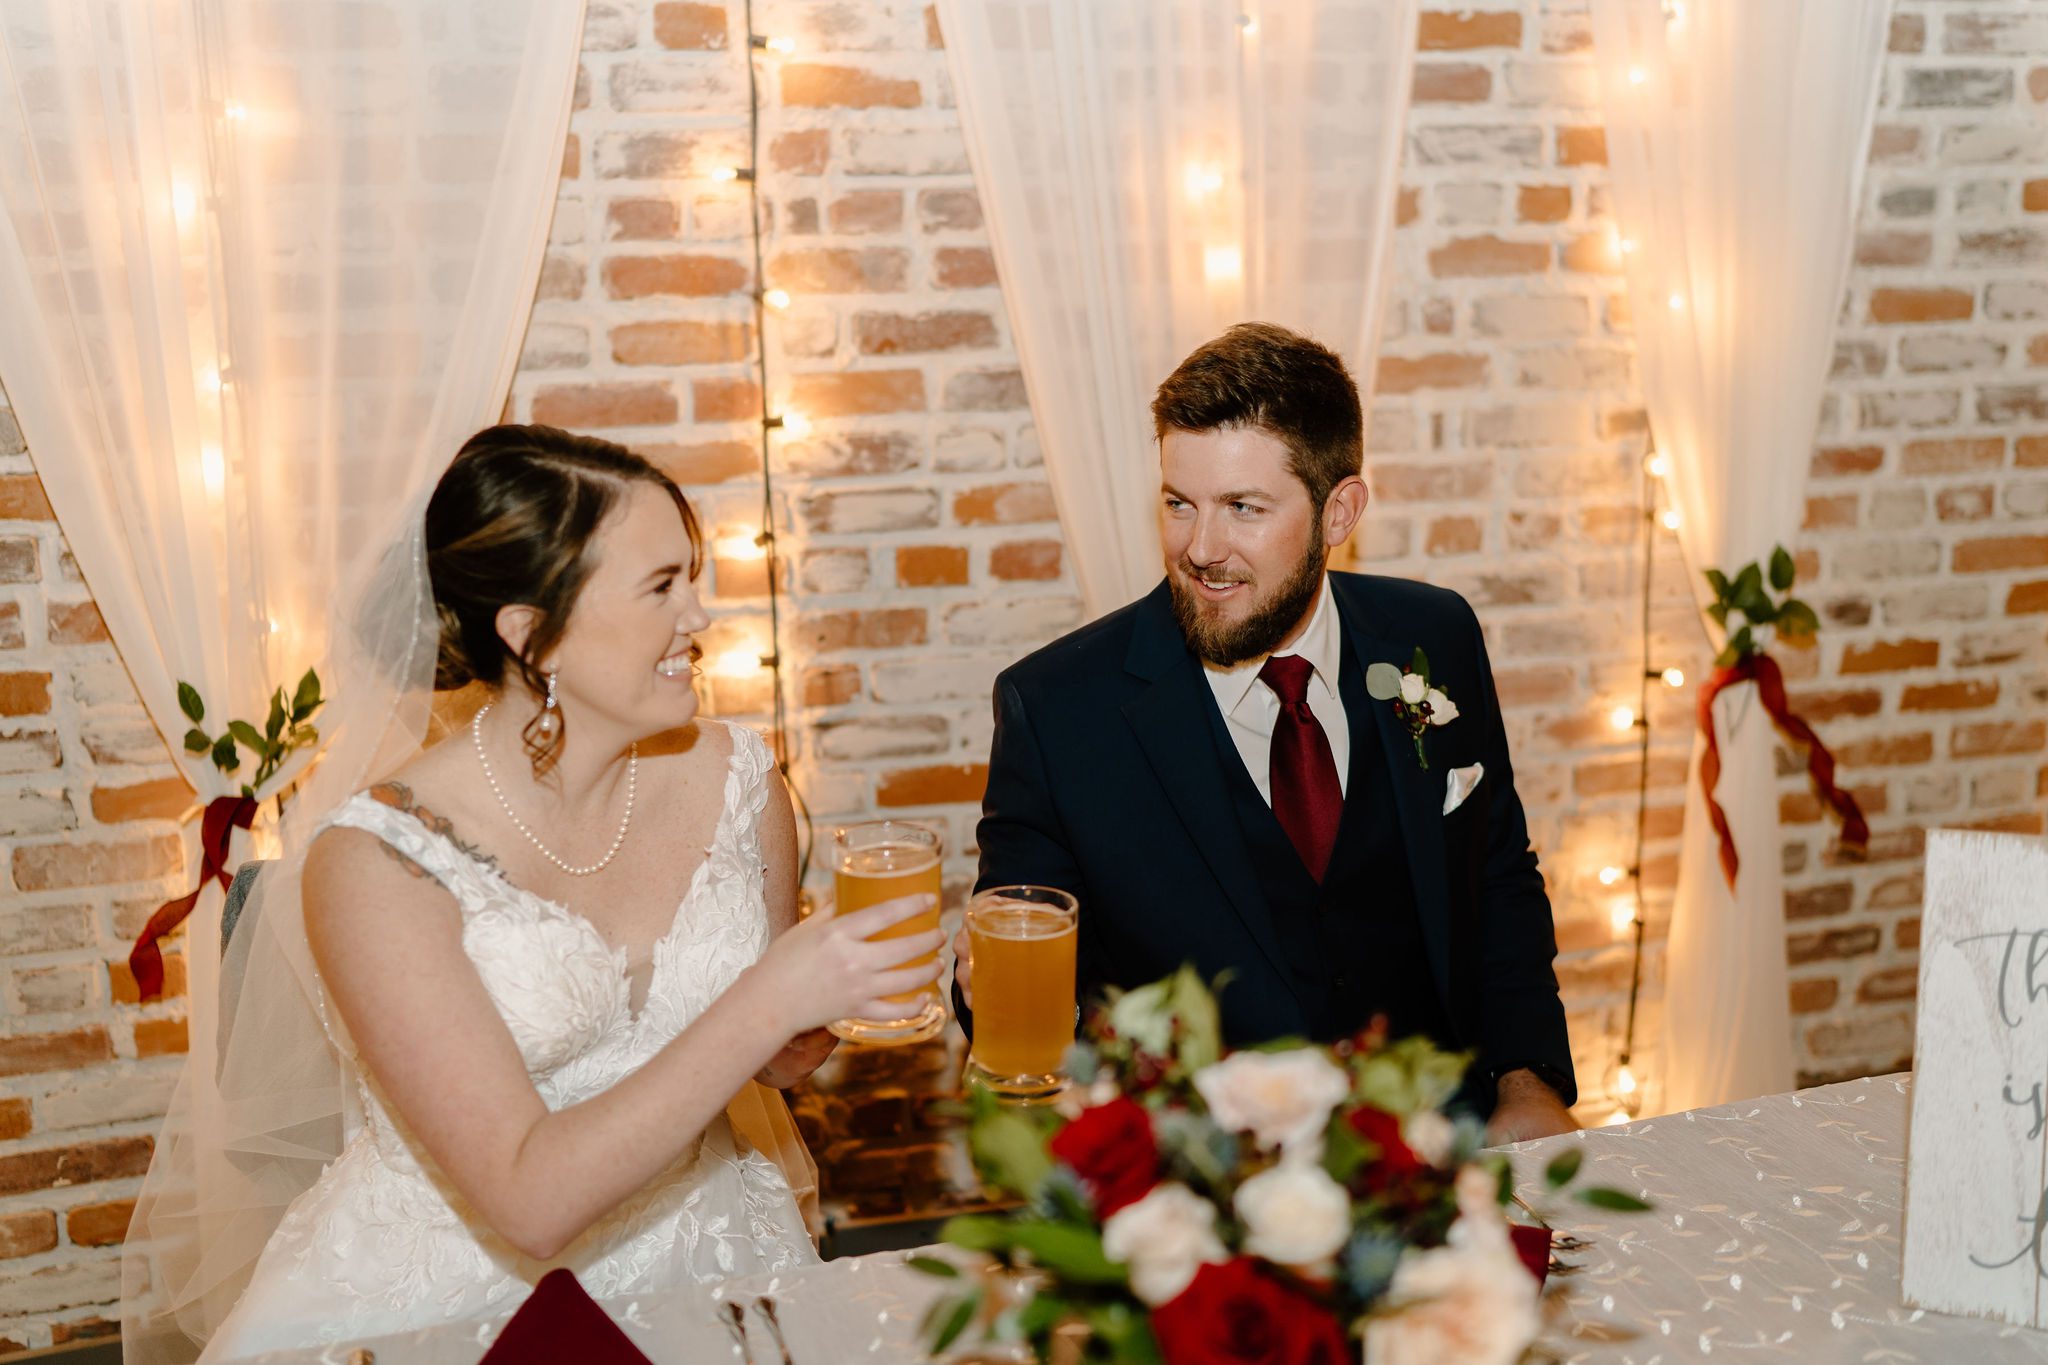 Details of Bakery 1818 venue in North Carolina during Christmas themed bride and groom photos with bridal party and friends and family
